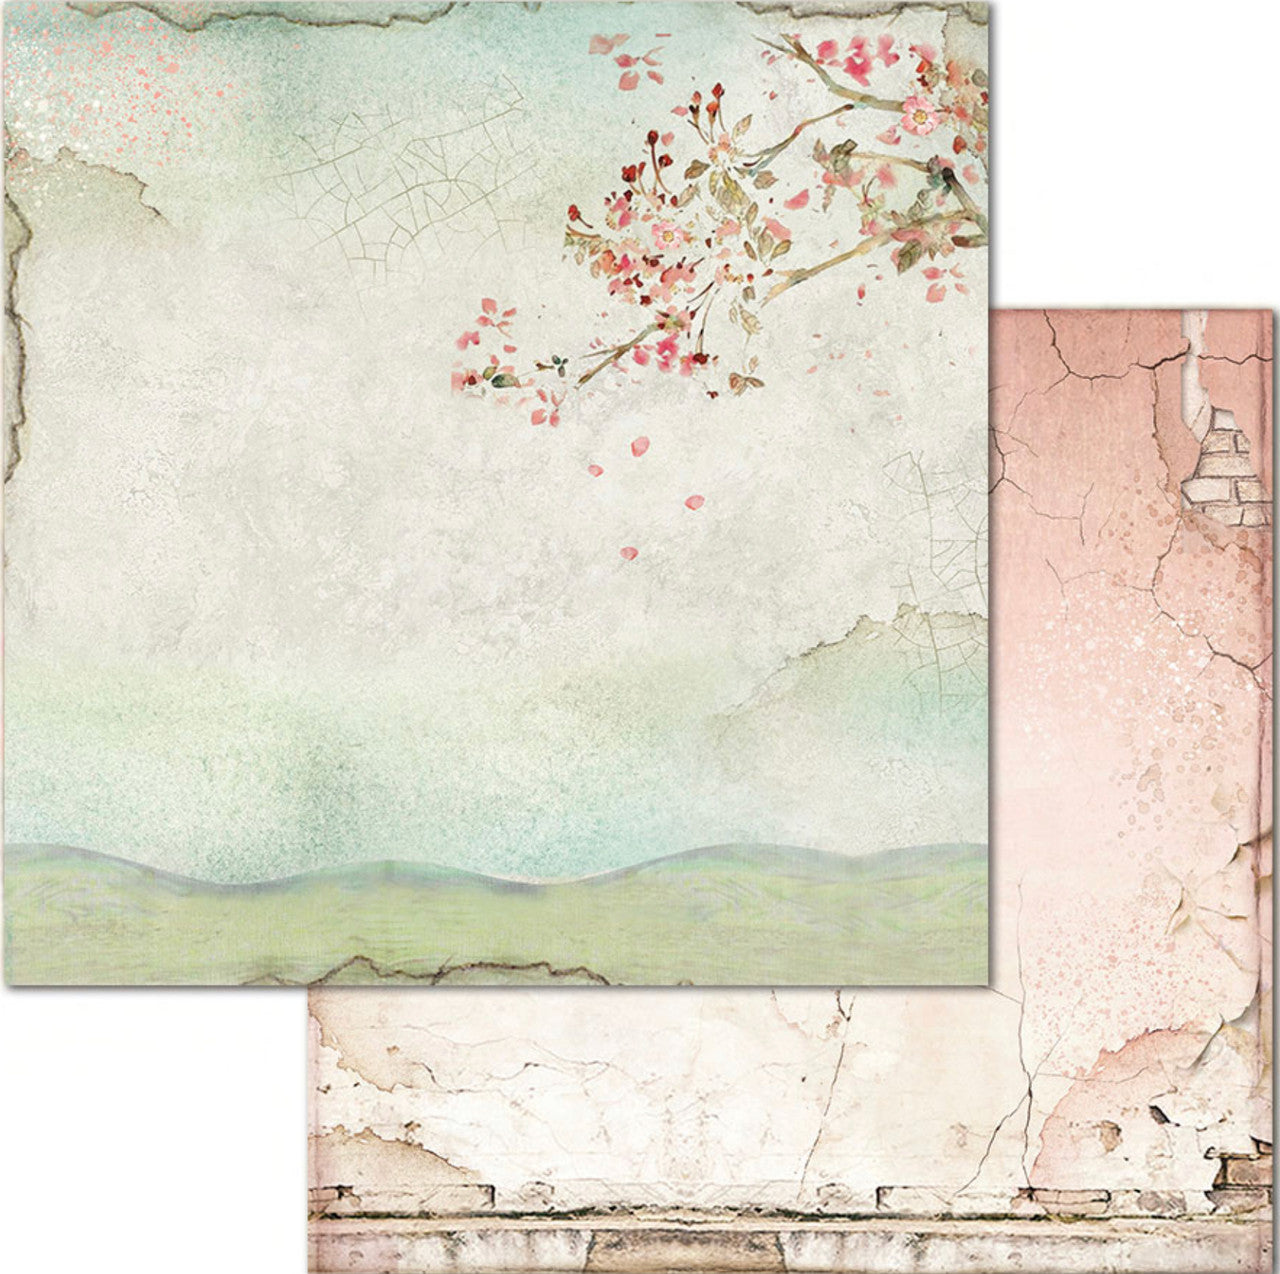 Stamperia House of Roses Paper Pack 12” x 12”